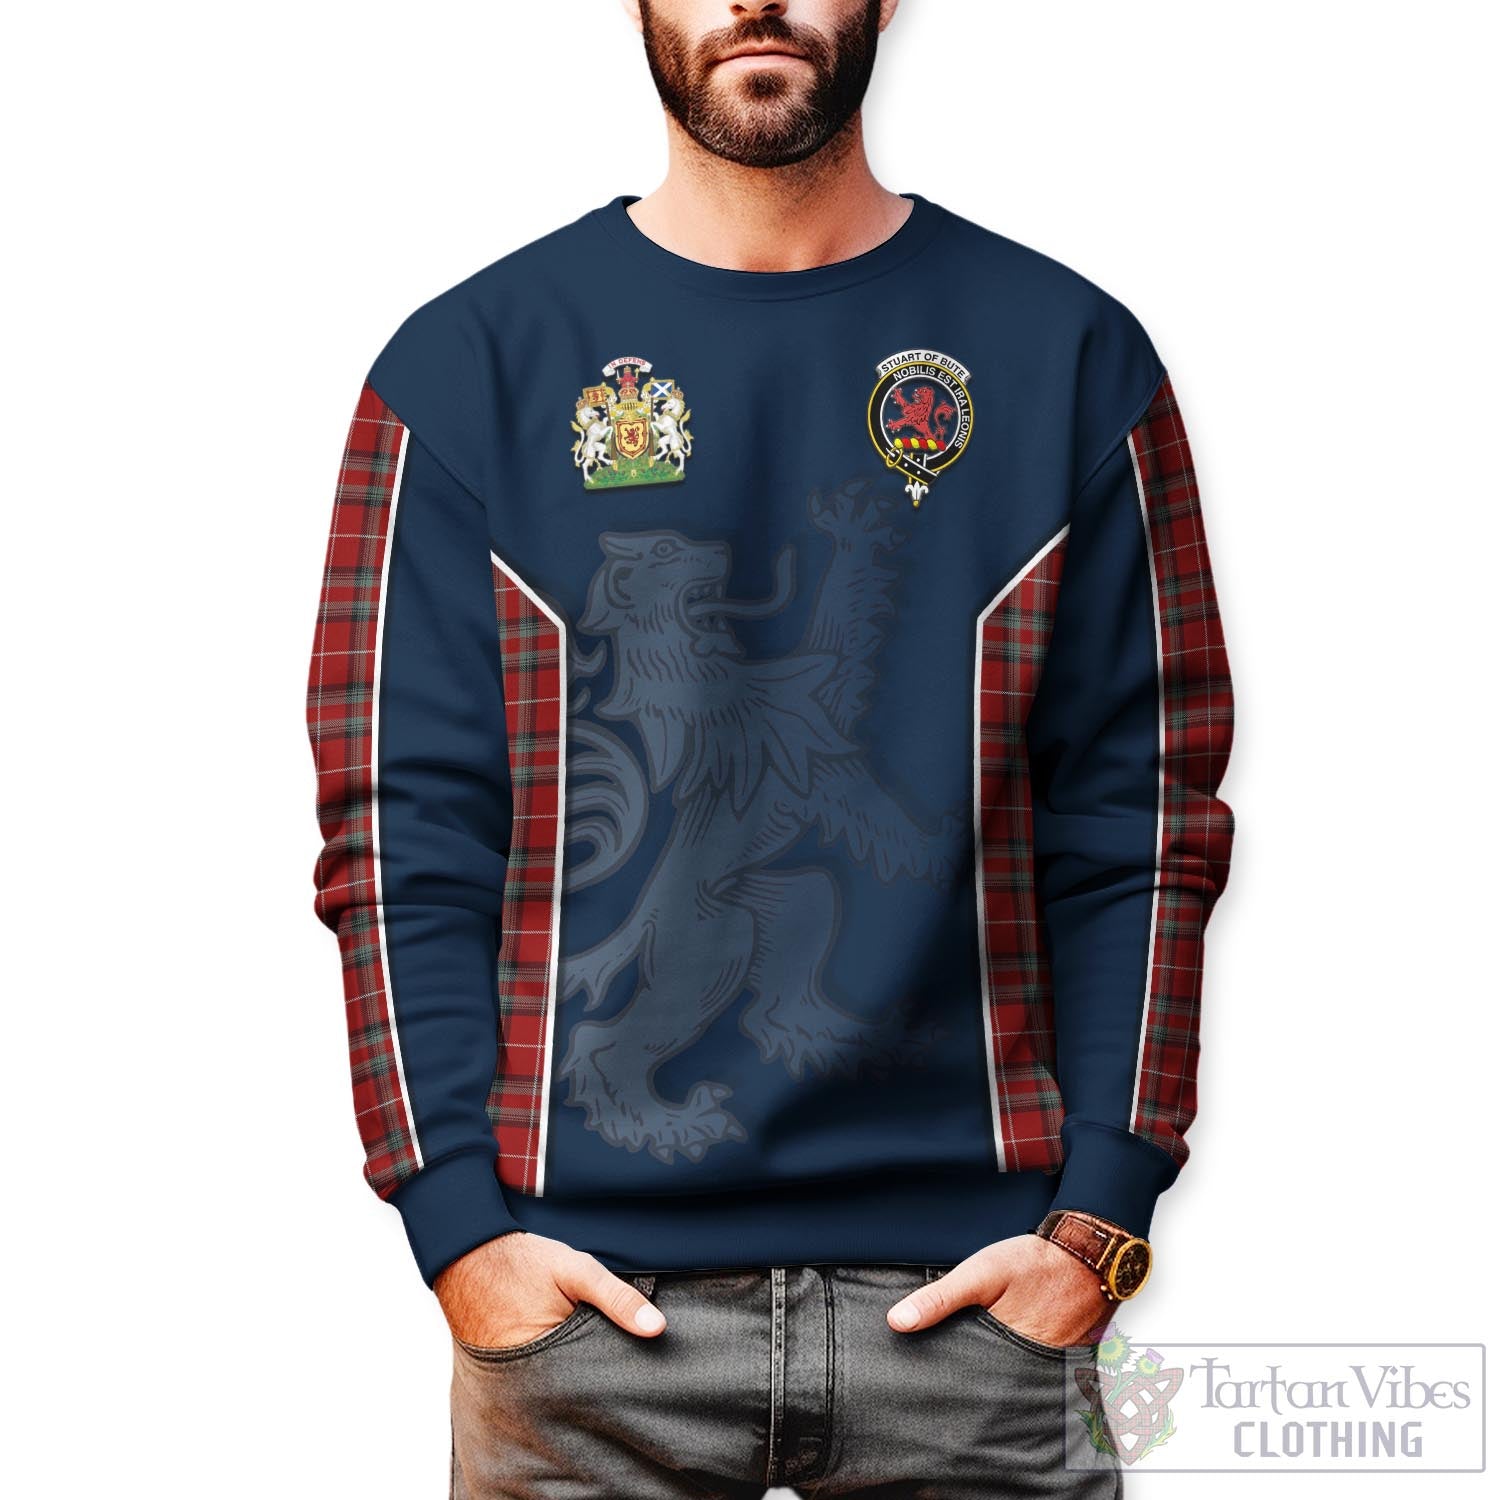 Tartan Vibes Clothing Stuart of Bute Tartan Sweater with Family Crest and Lion Rampant Vibes Sport Style